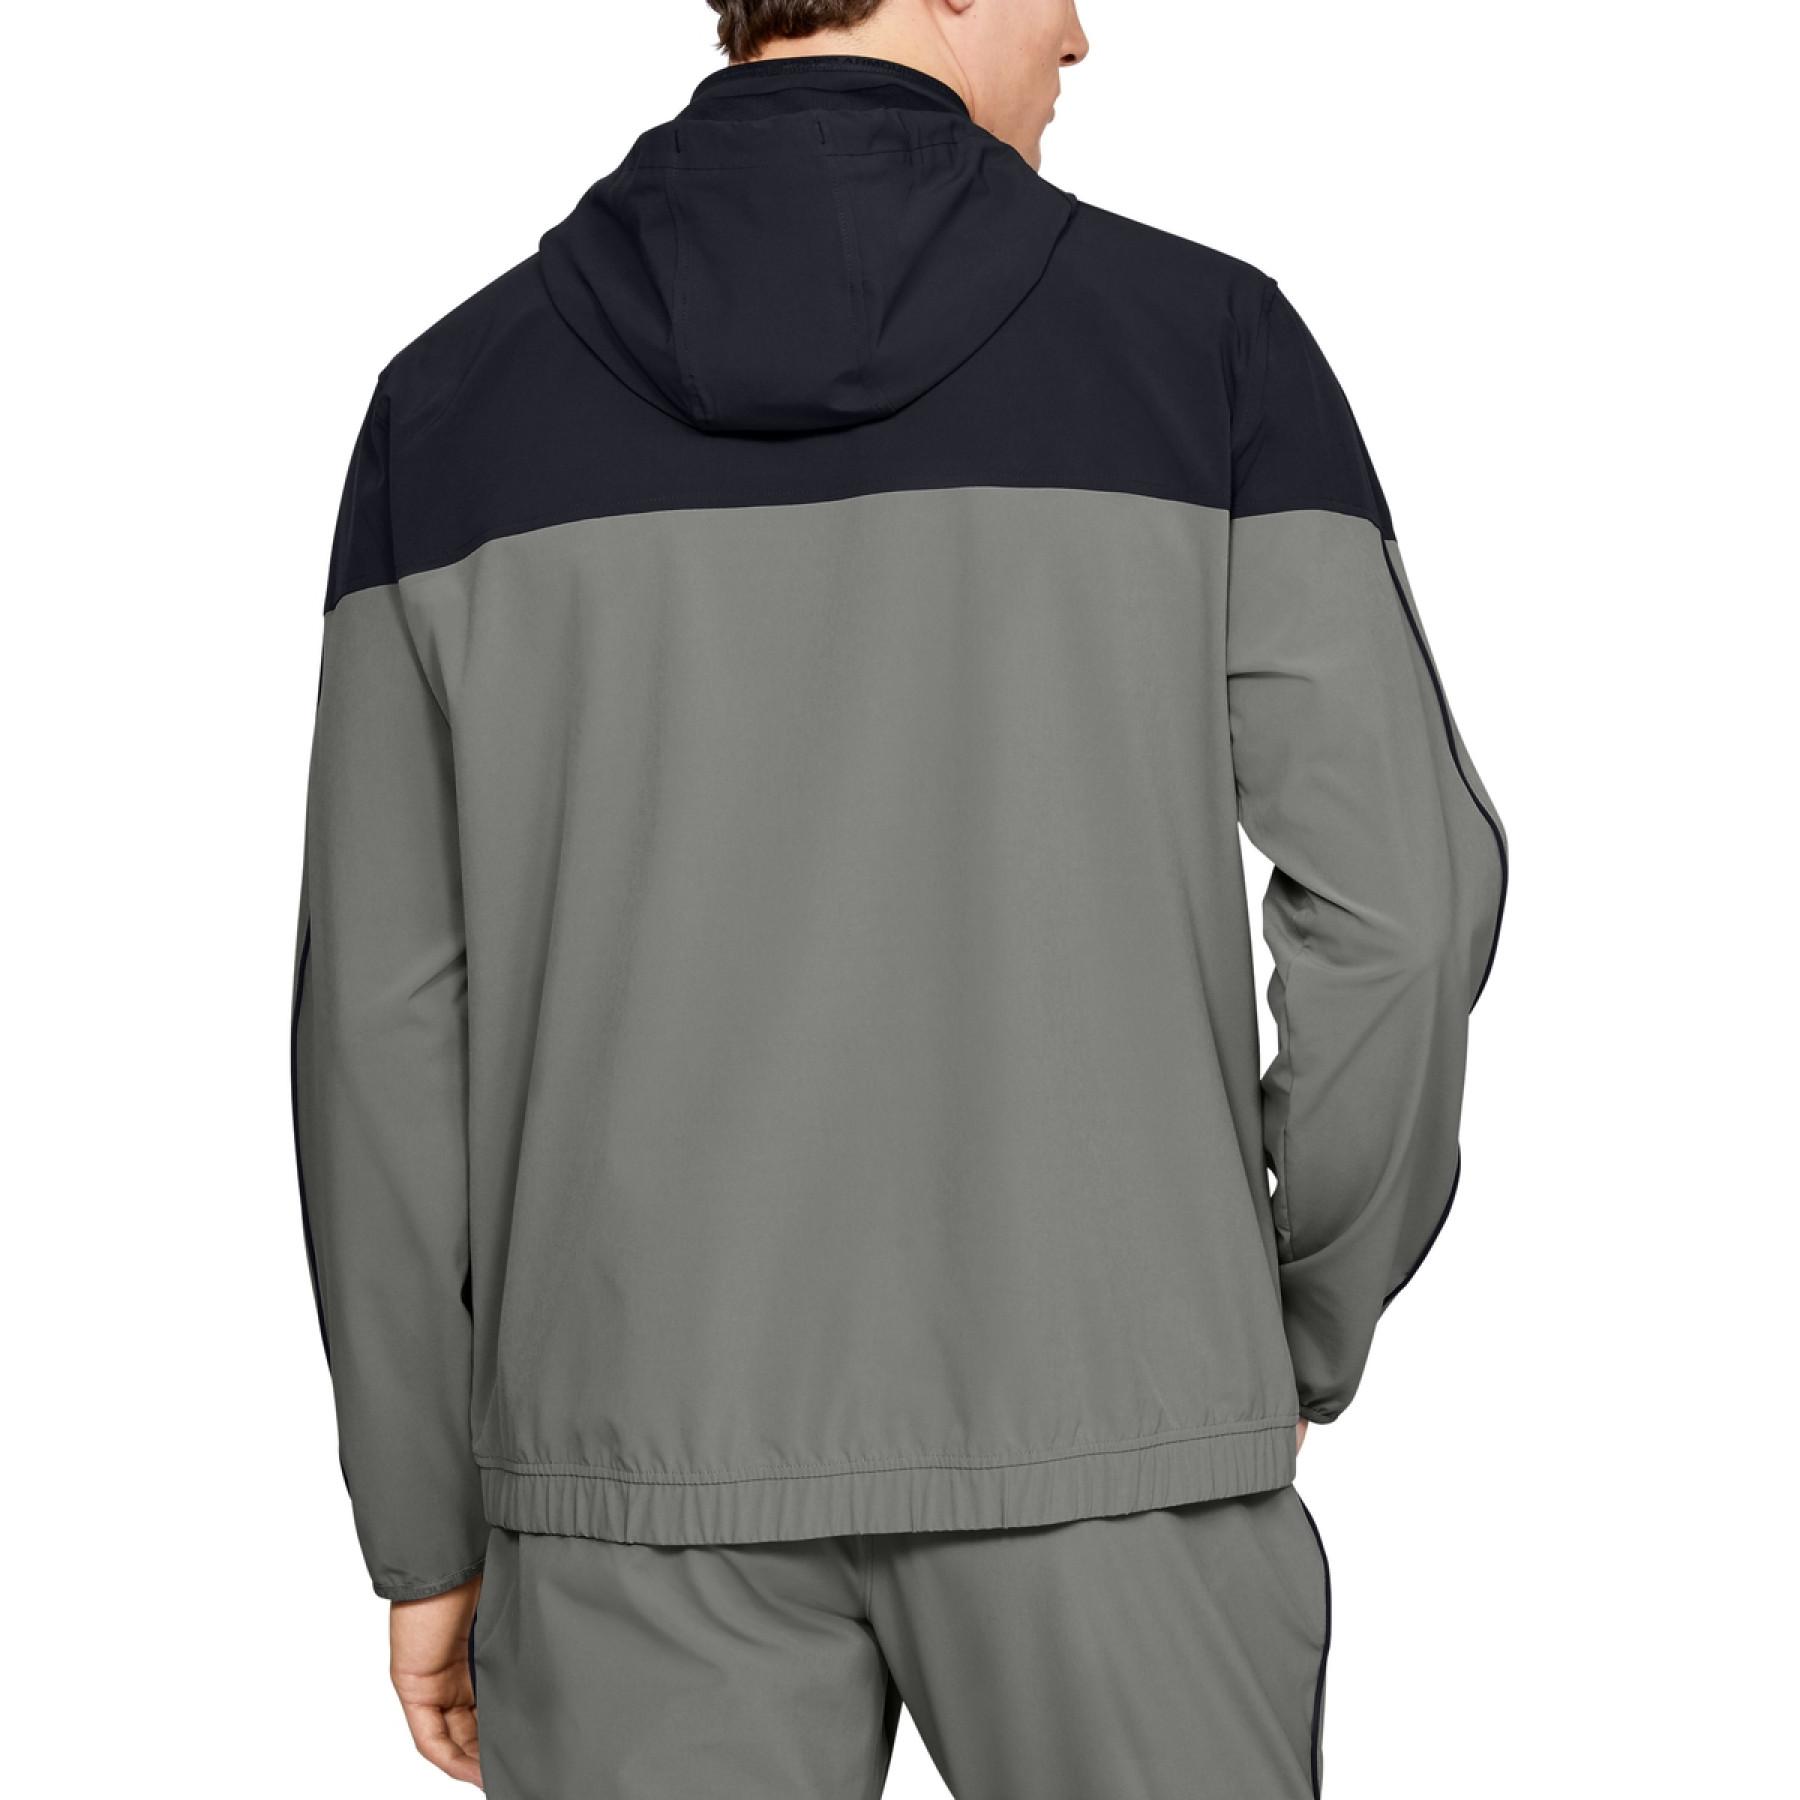 Kurtka Under Armour recover Woven Warm-Up